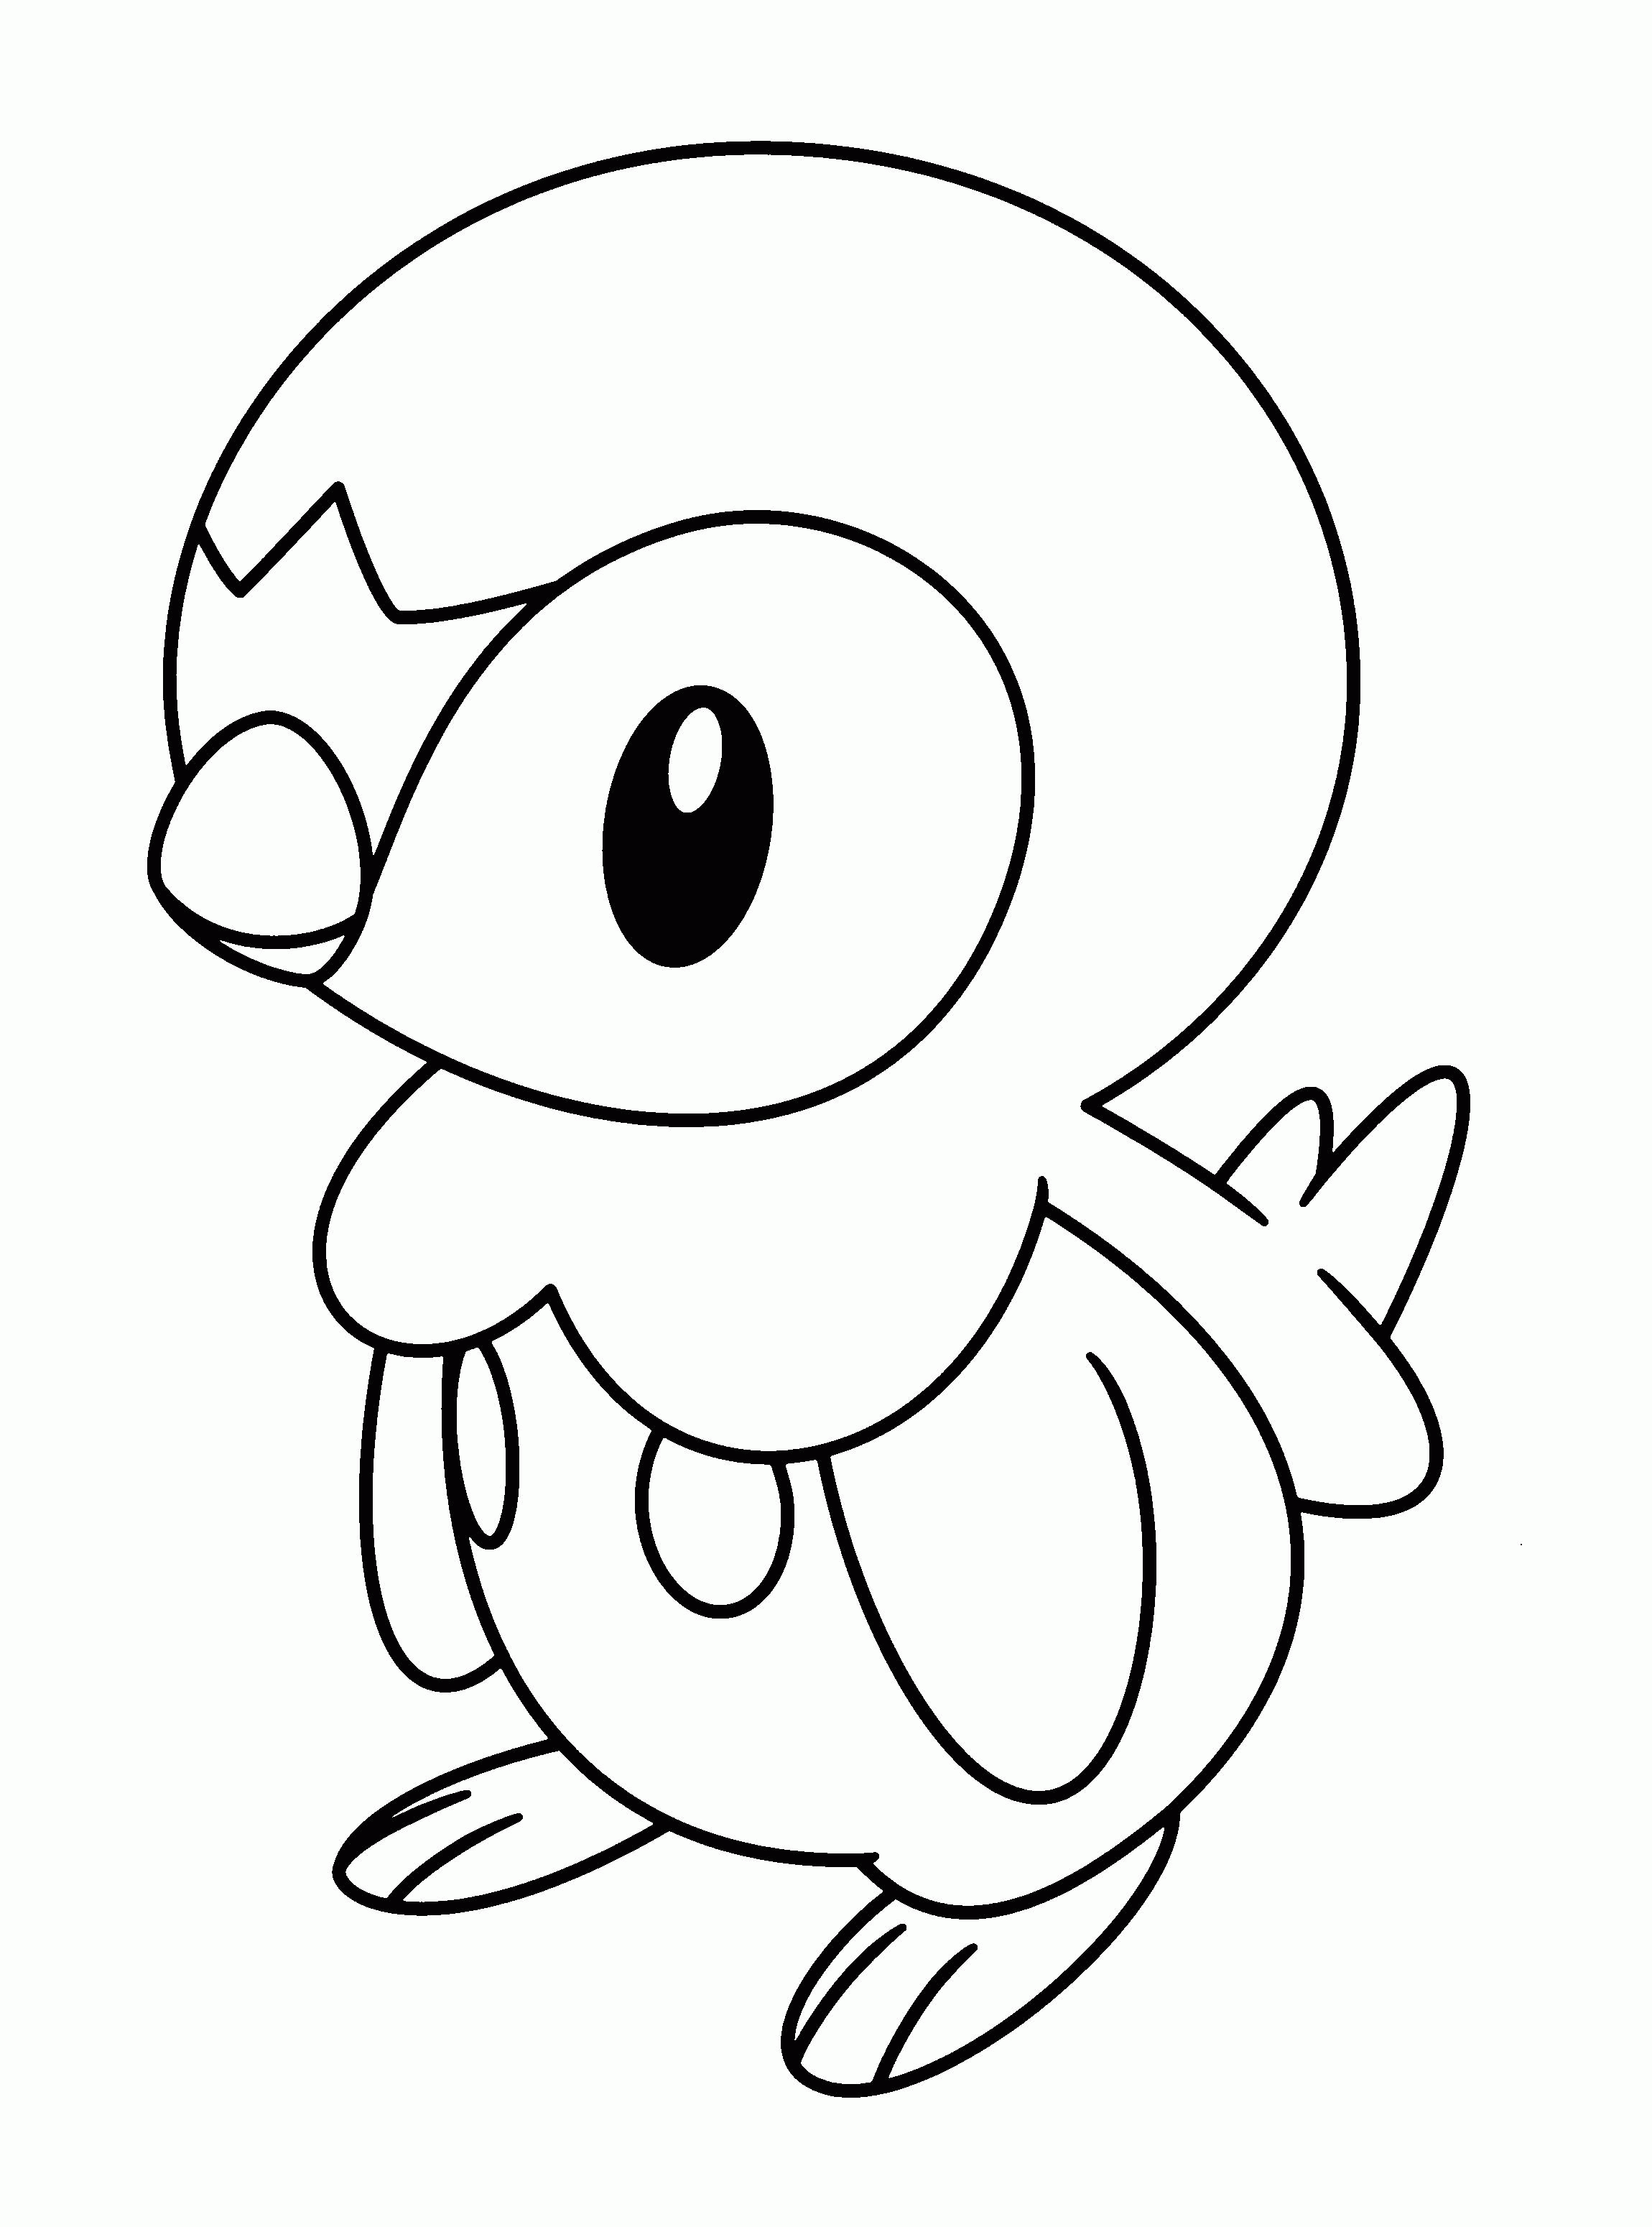 Cool Pokemon 23 Coloring Page